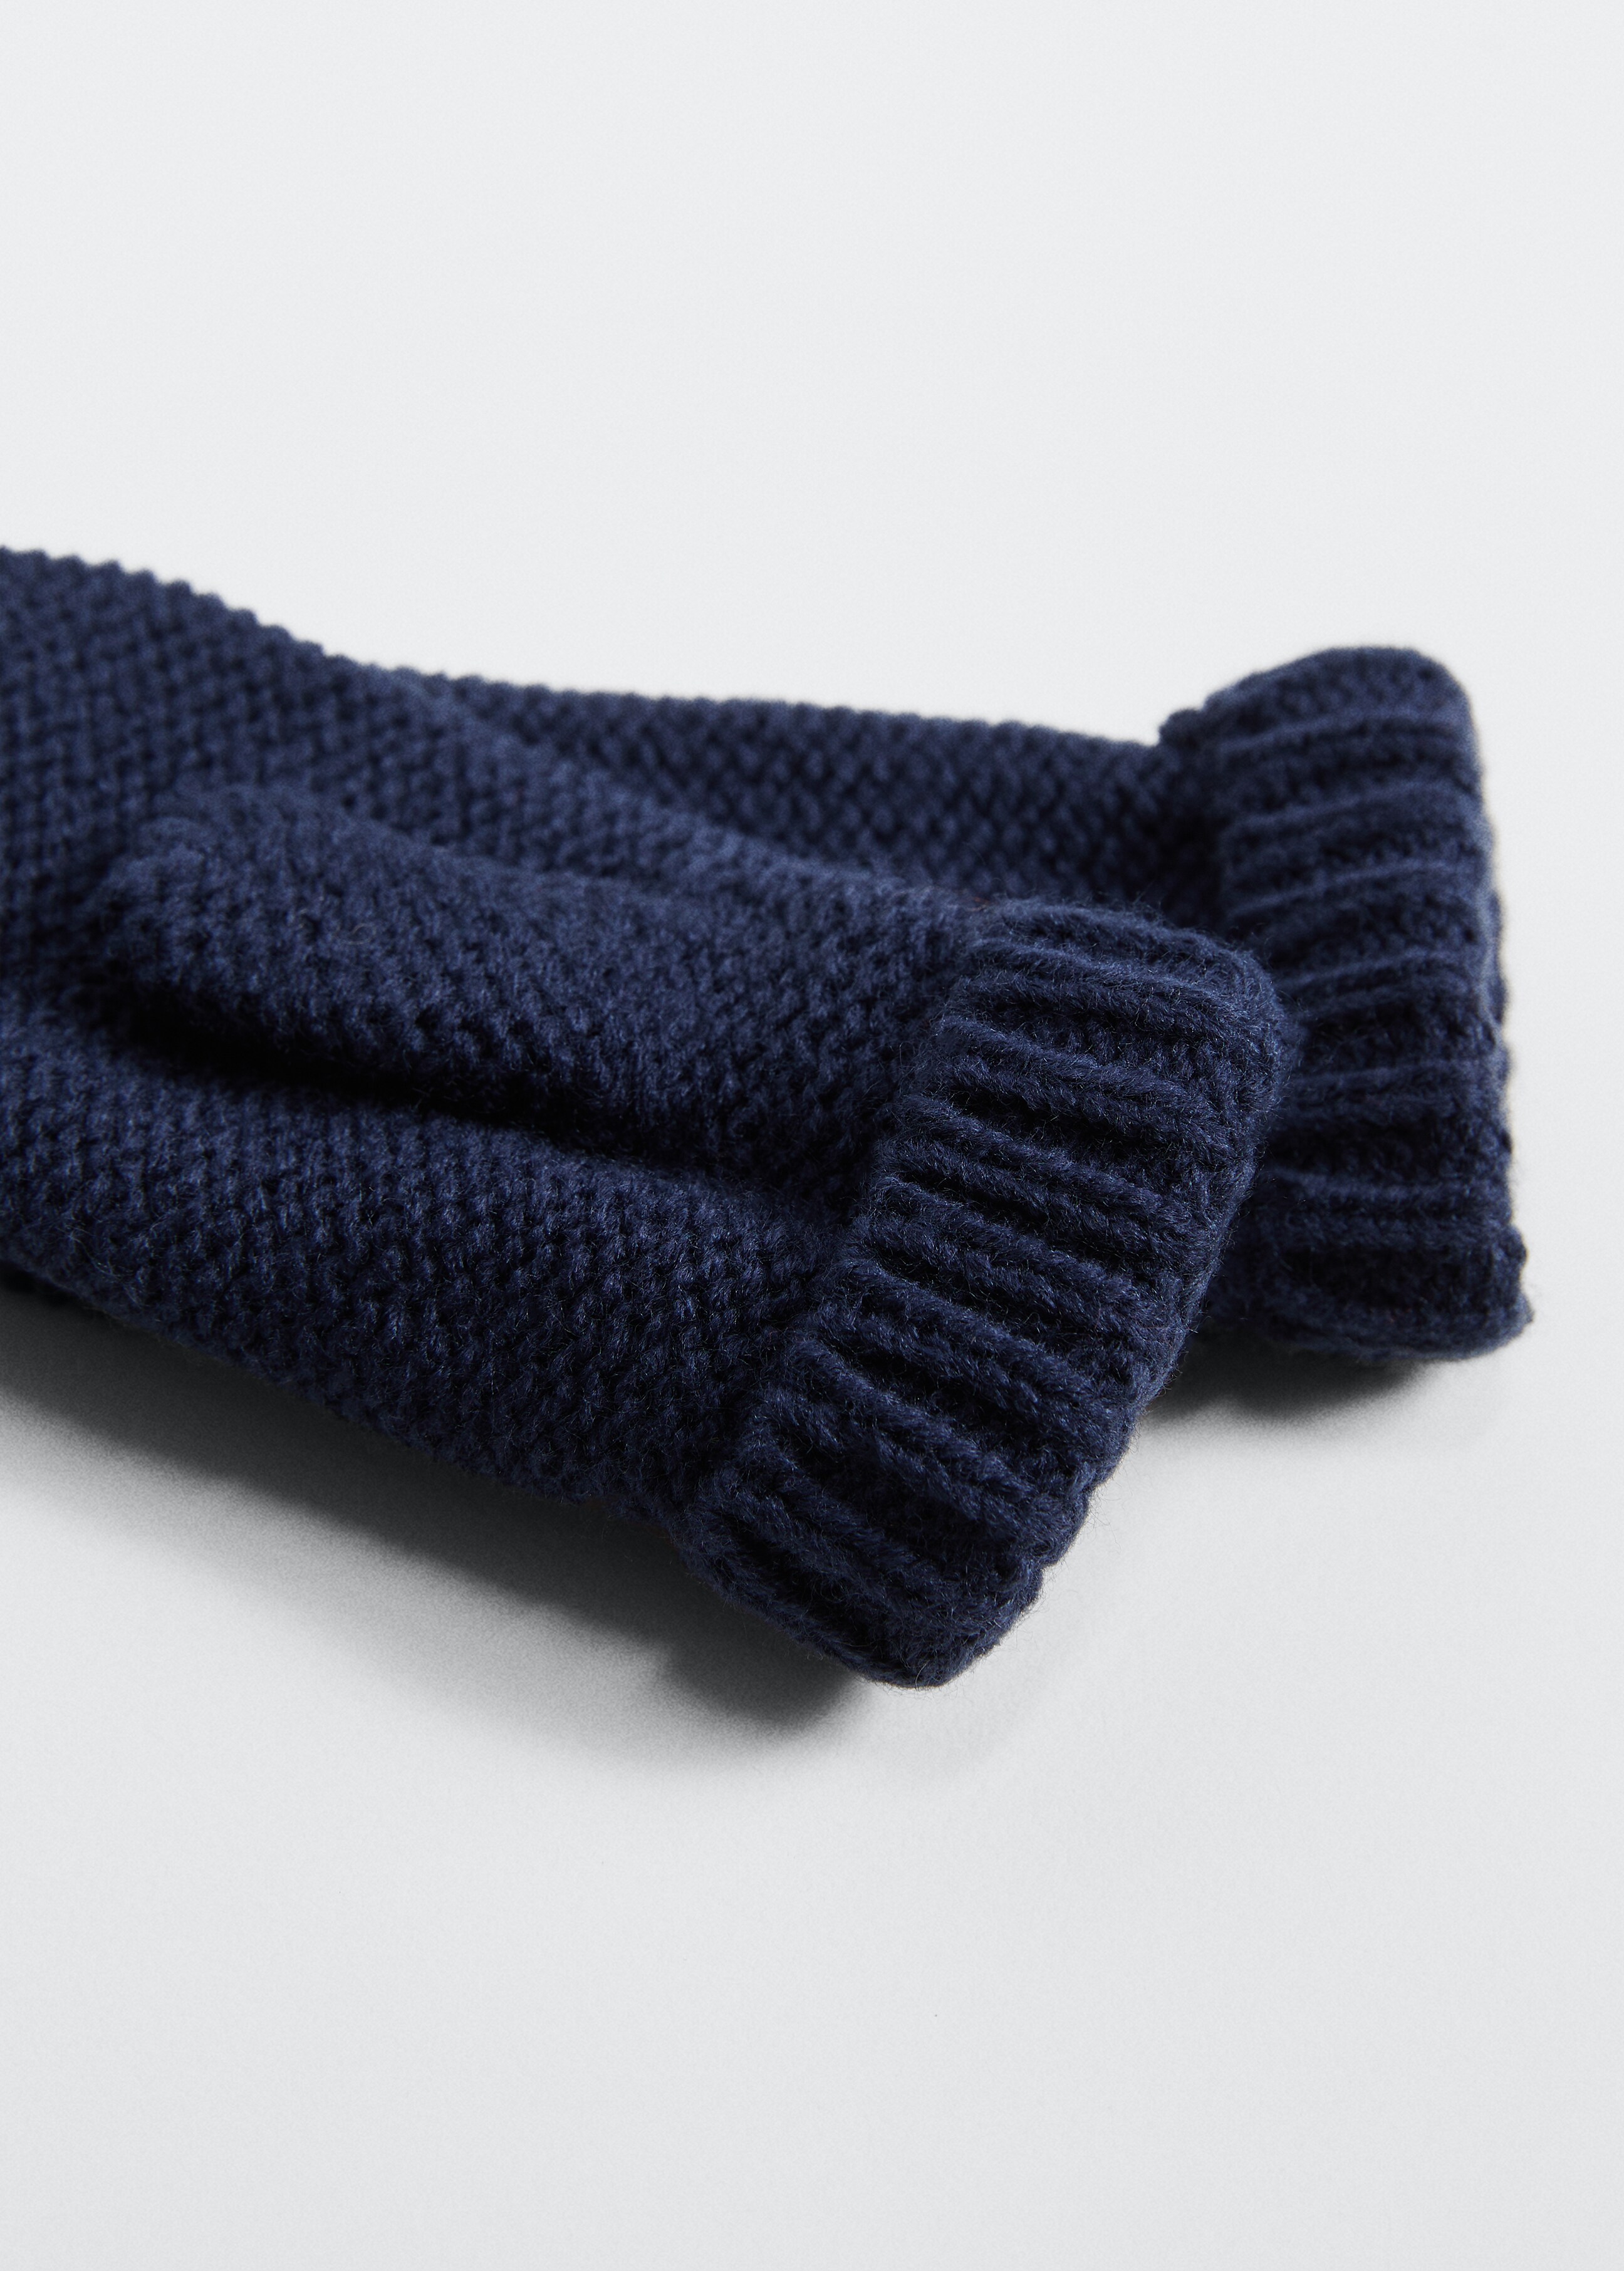 Knit gloves - Details of the article 4